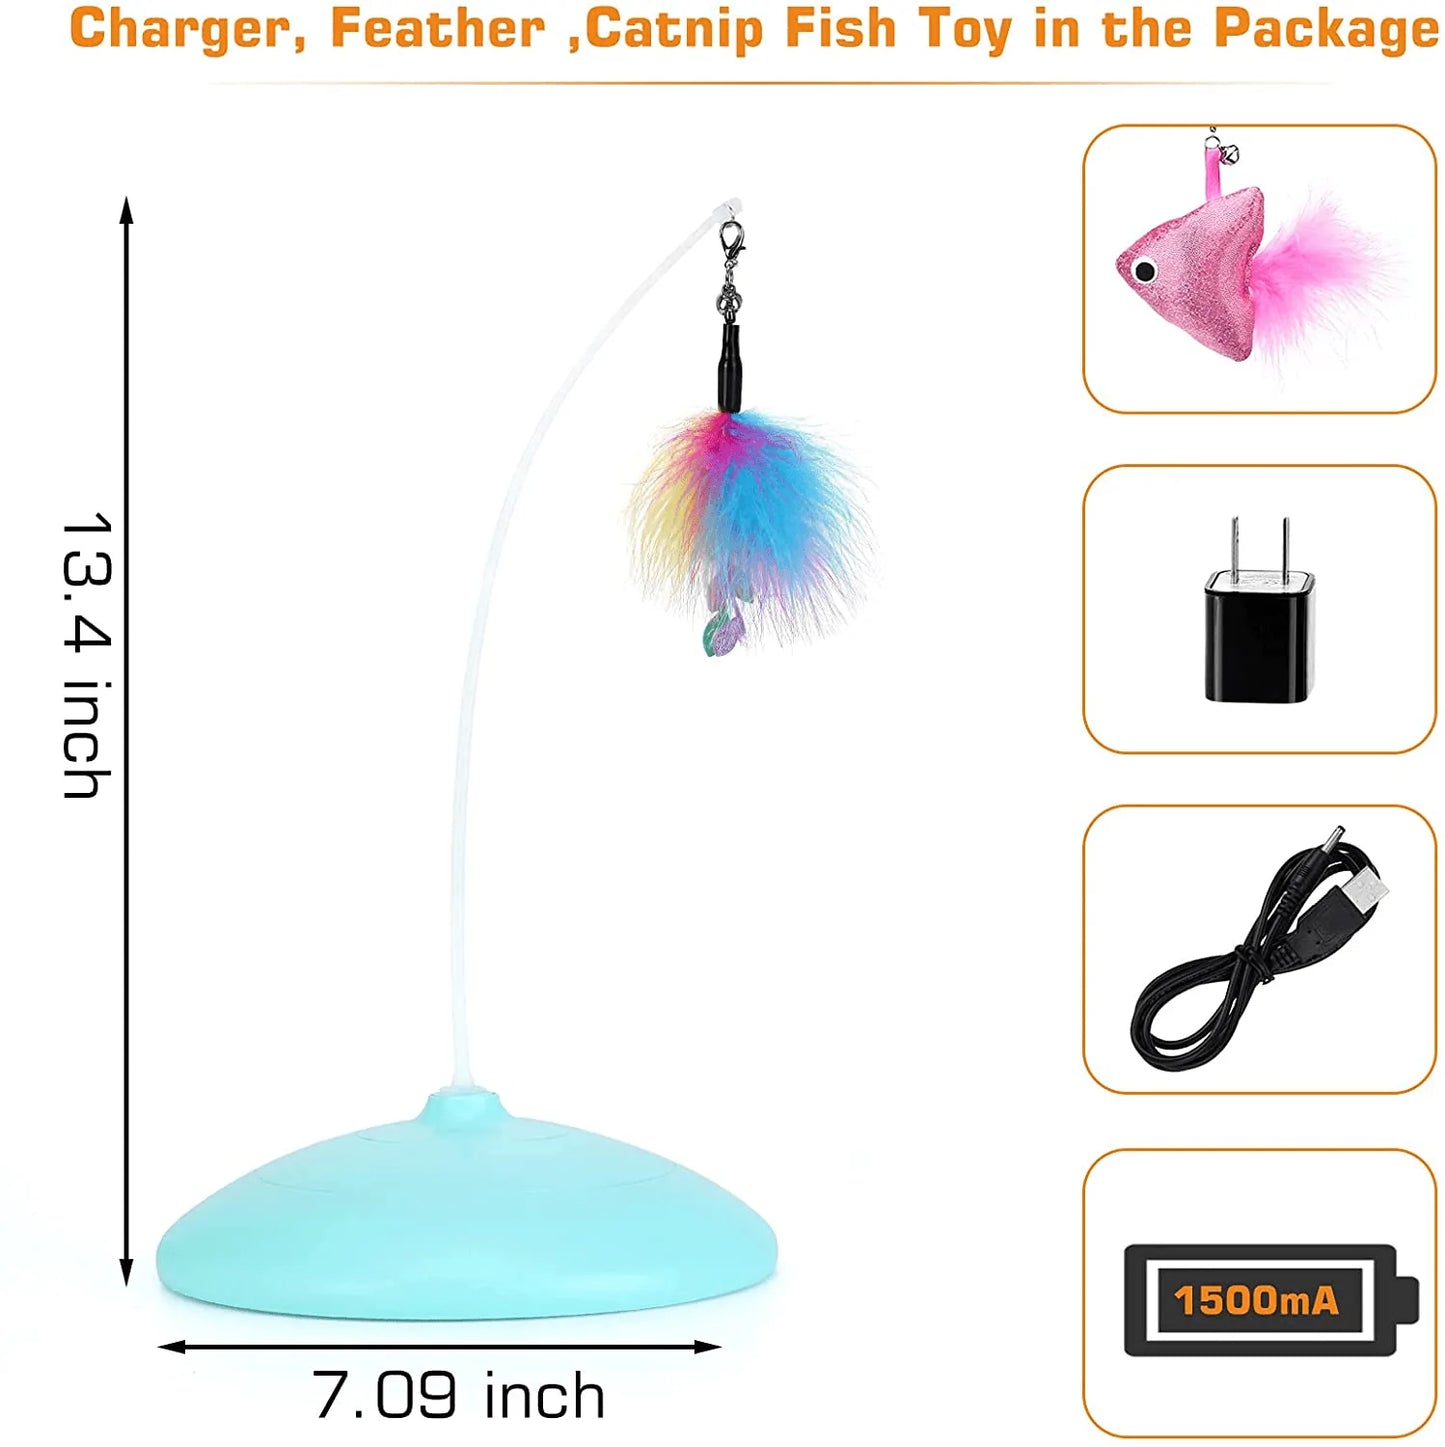 Zutesu Interactive Cat Toy Kitten Toy for Indoor Cat, Automatic Cat Toy Funny Feather Teaser Toy Puzzle Game Smart Stimulate Hunting Instinct